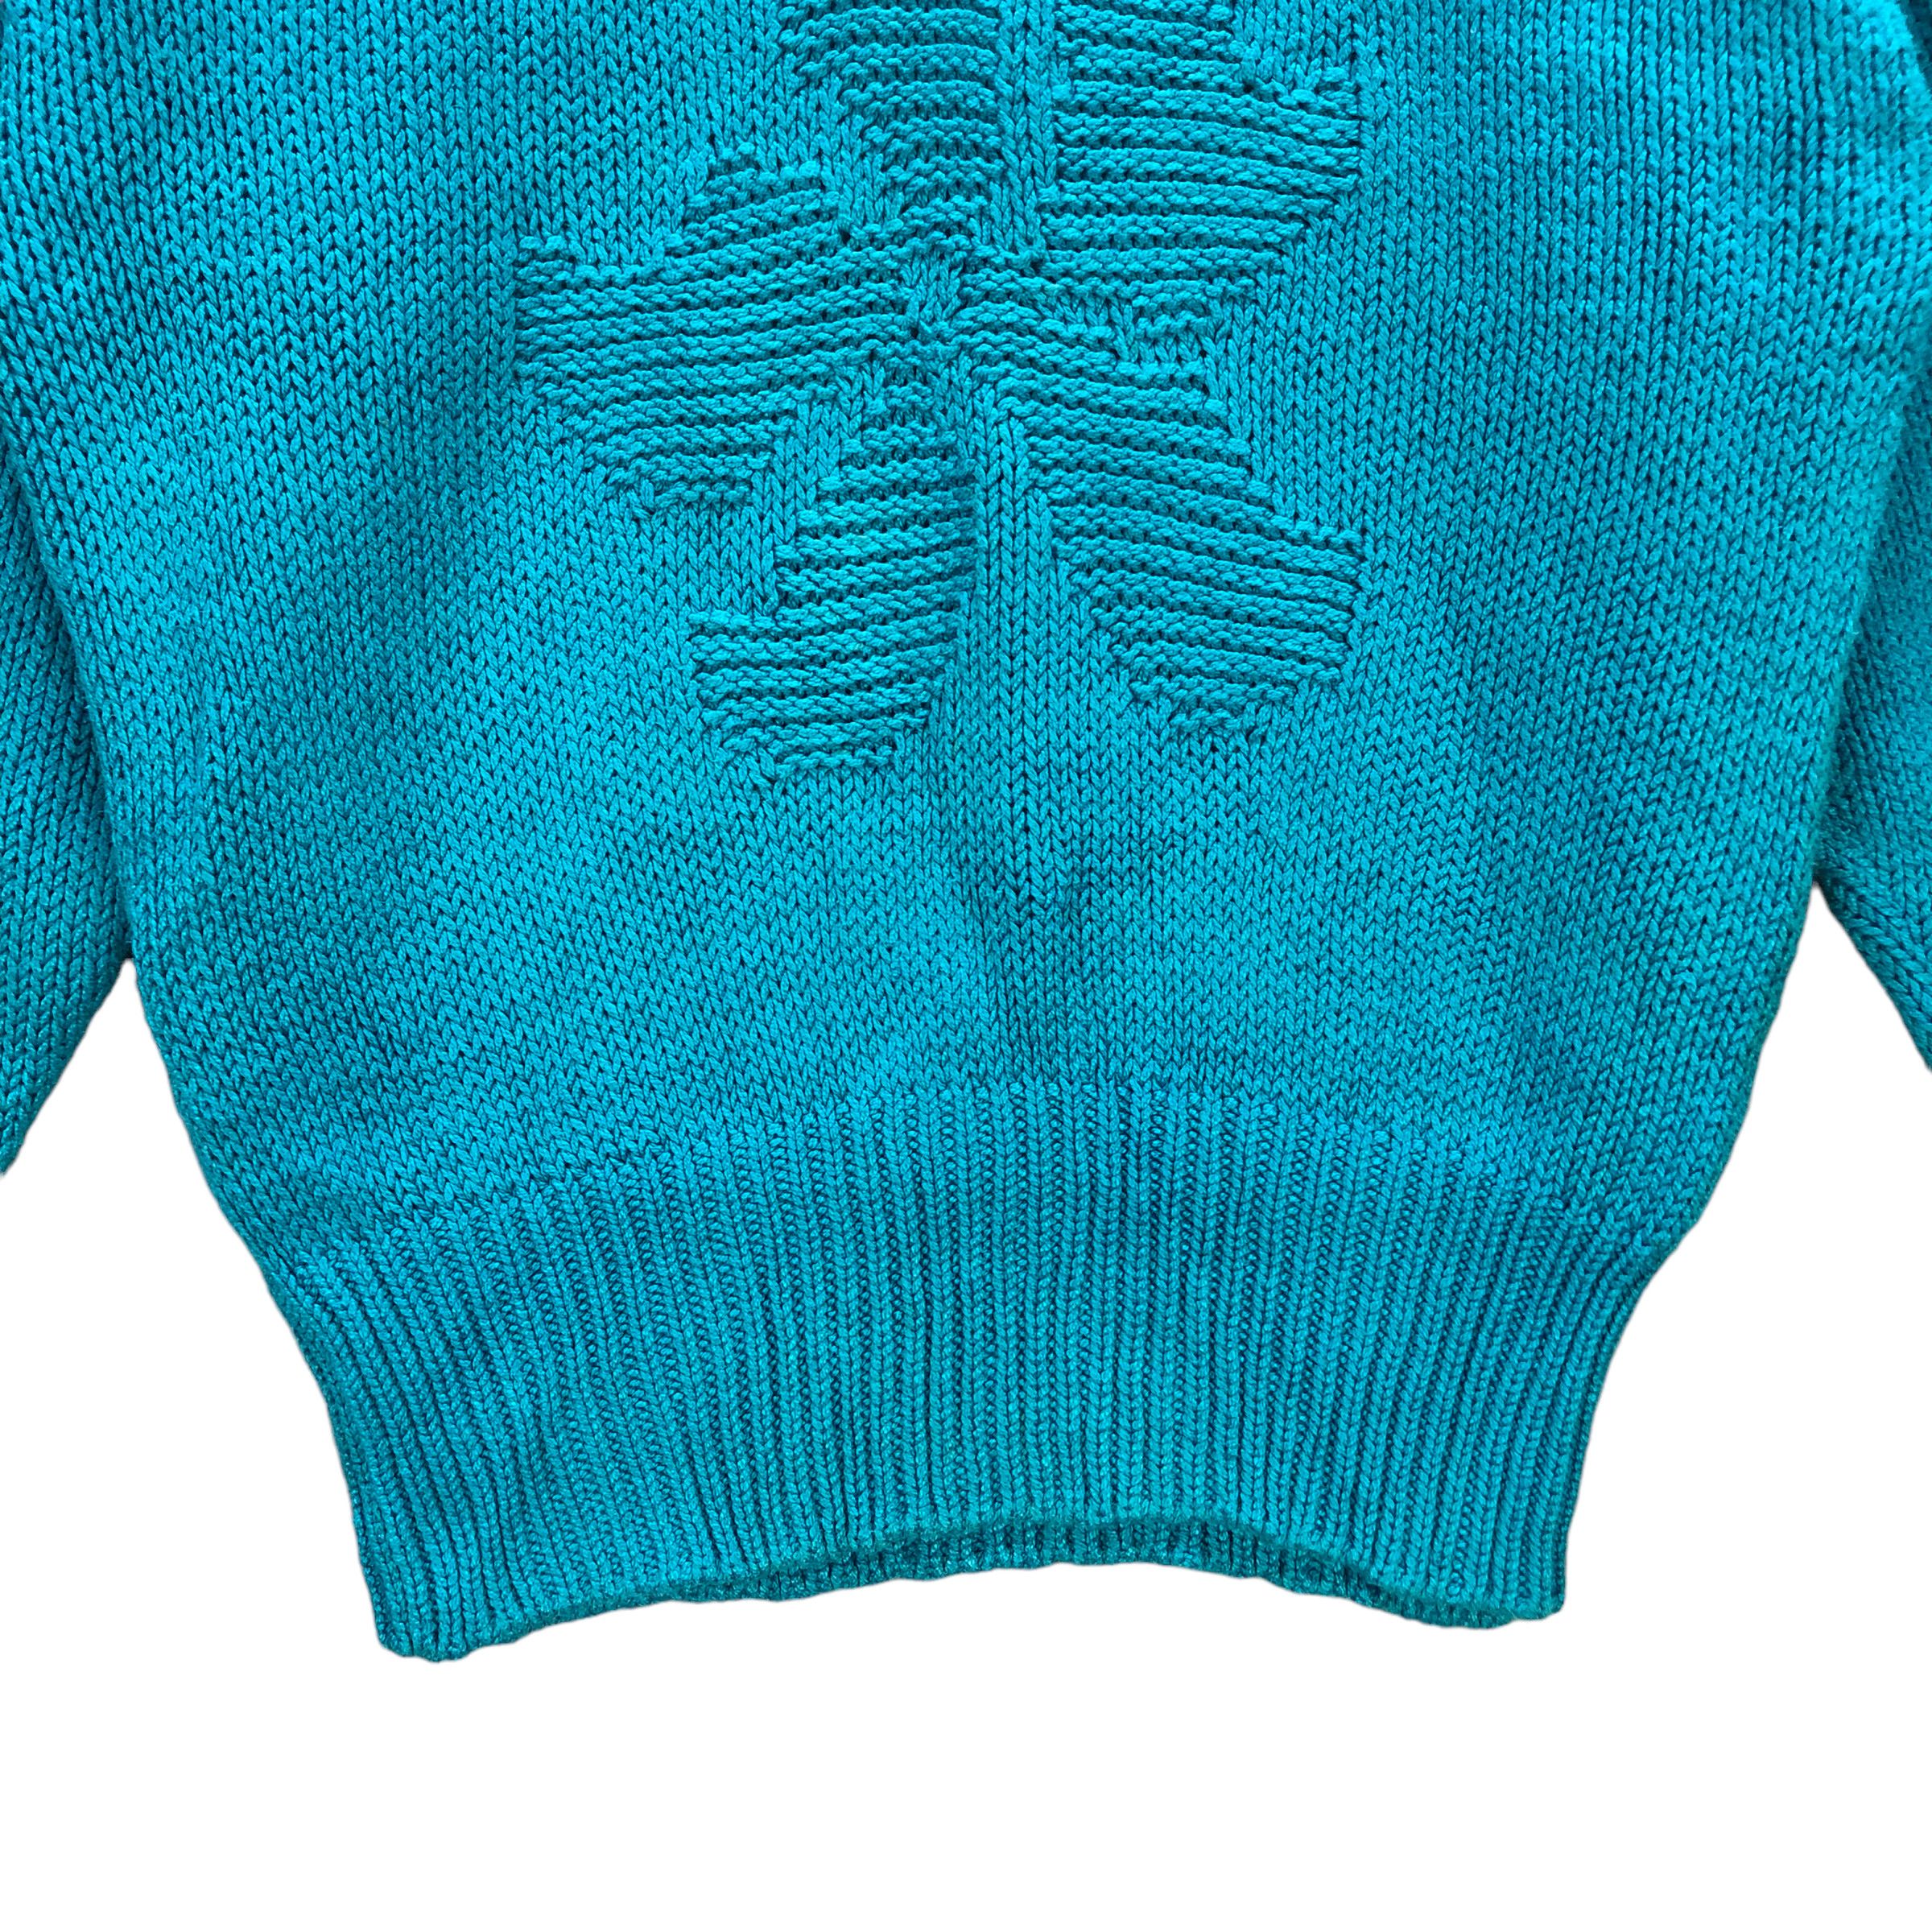 80's GUCCI CABLE KNIT SWEATER #6993-104 - 4